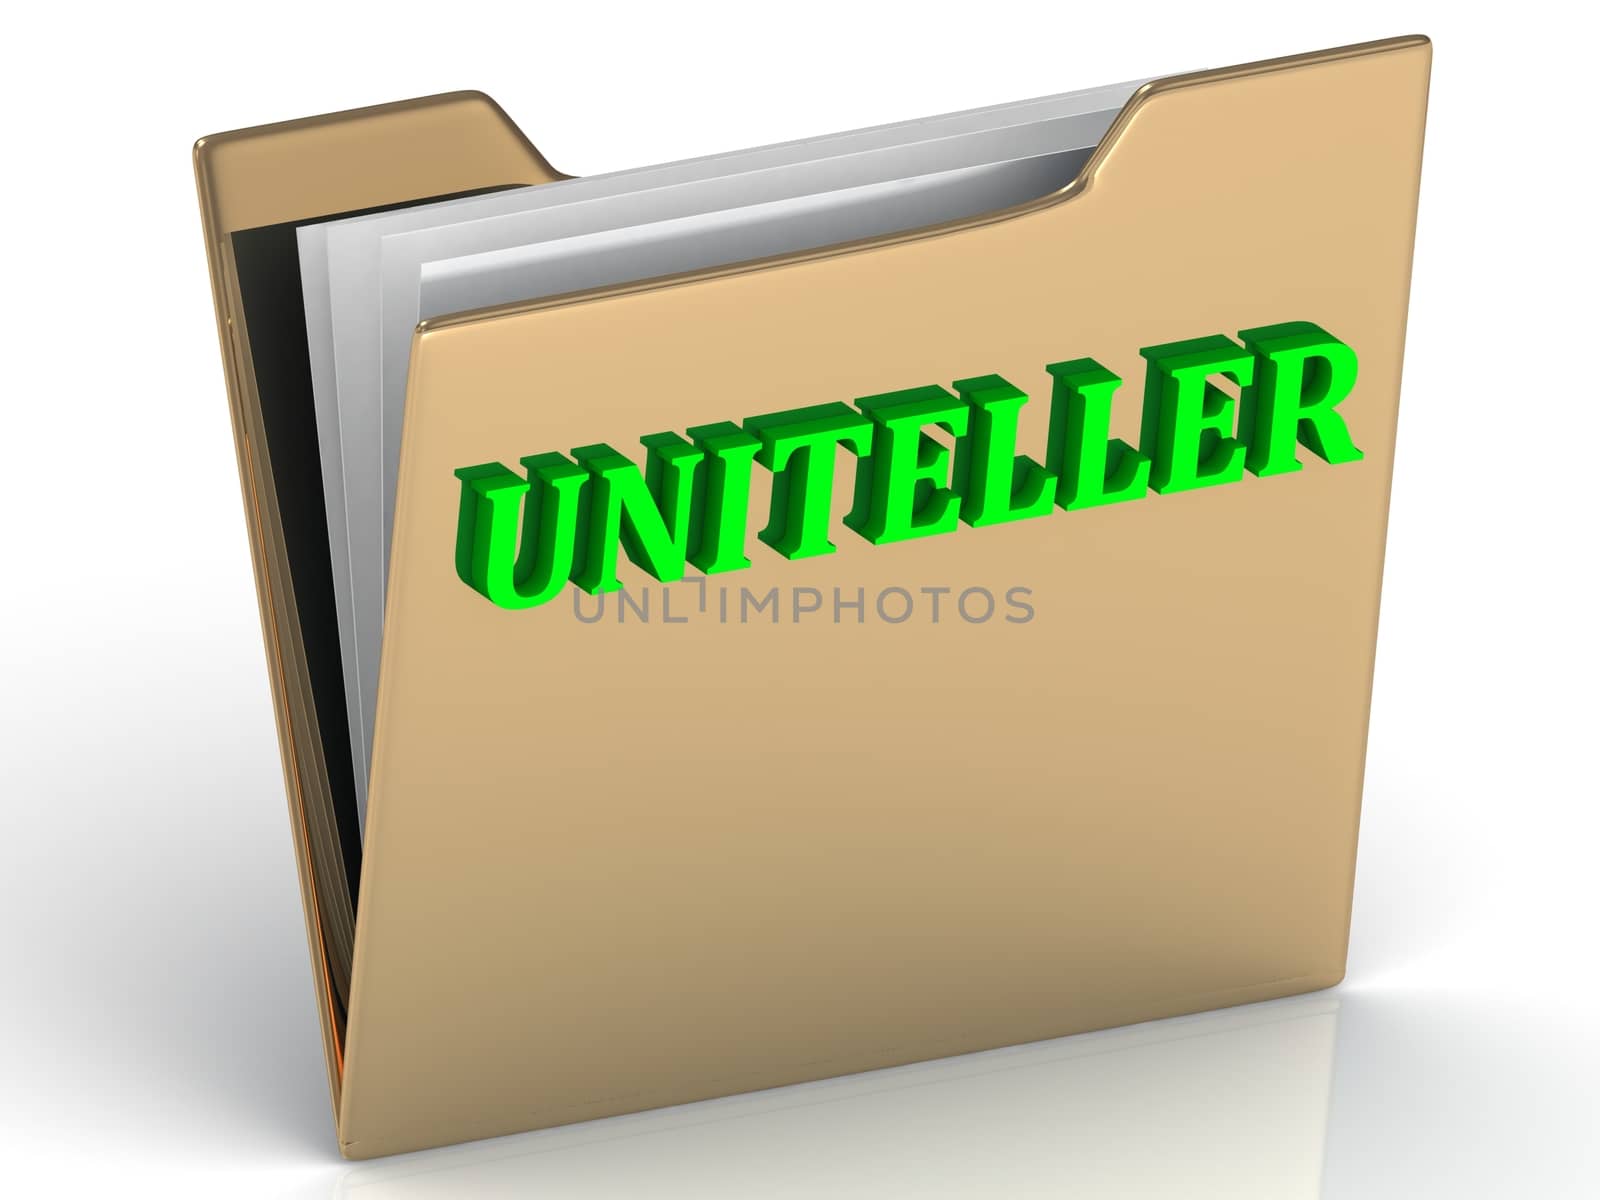 UNITELLER- bright letters on a gold folder on a white background